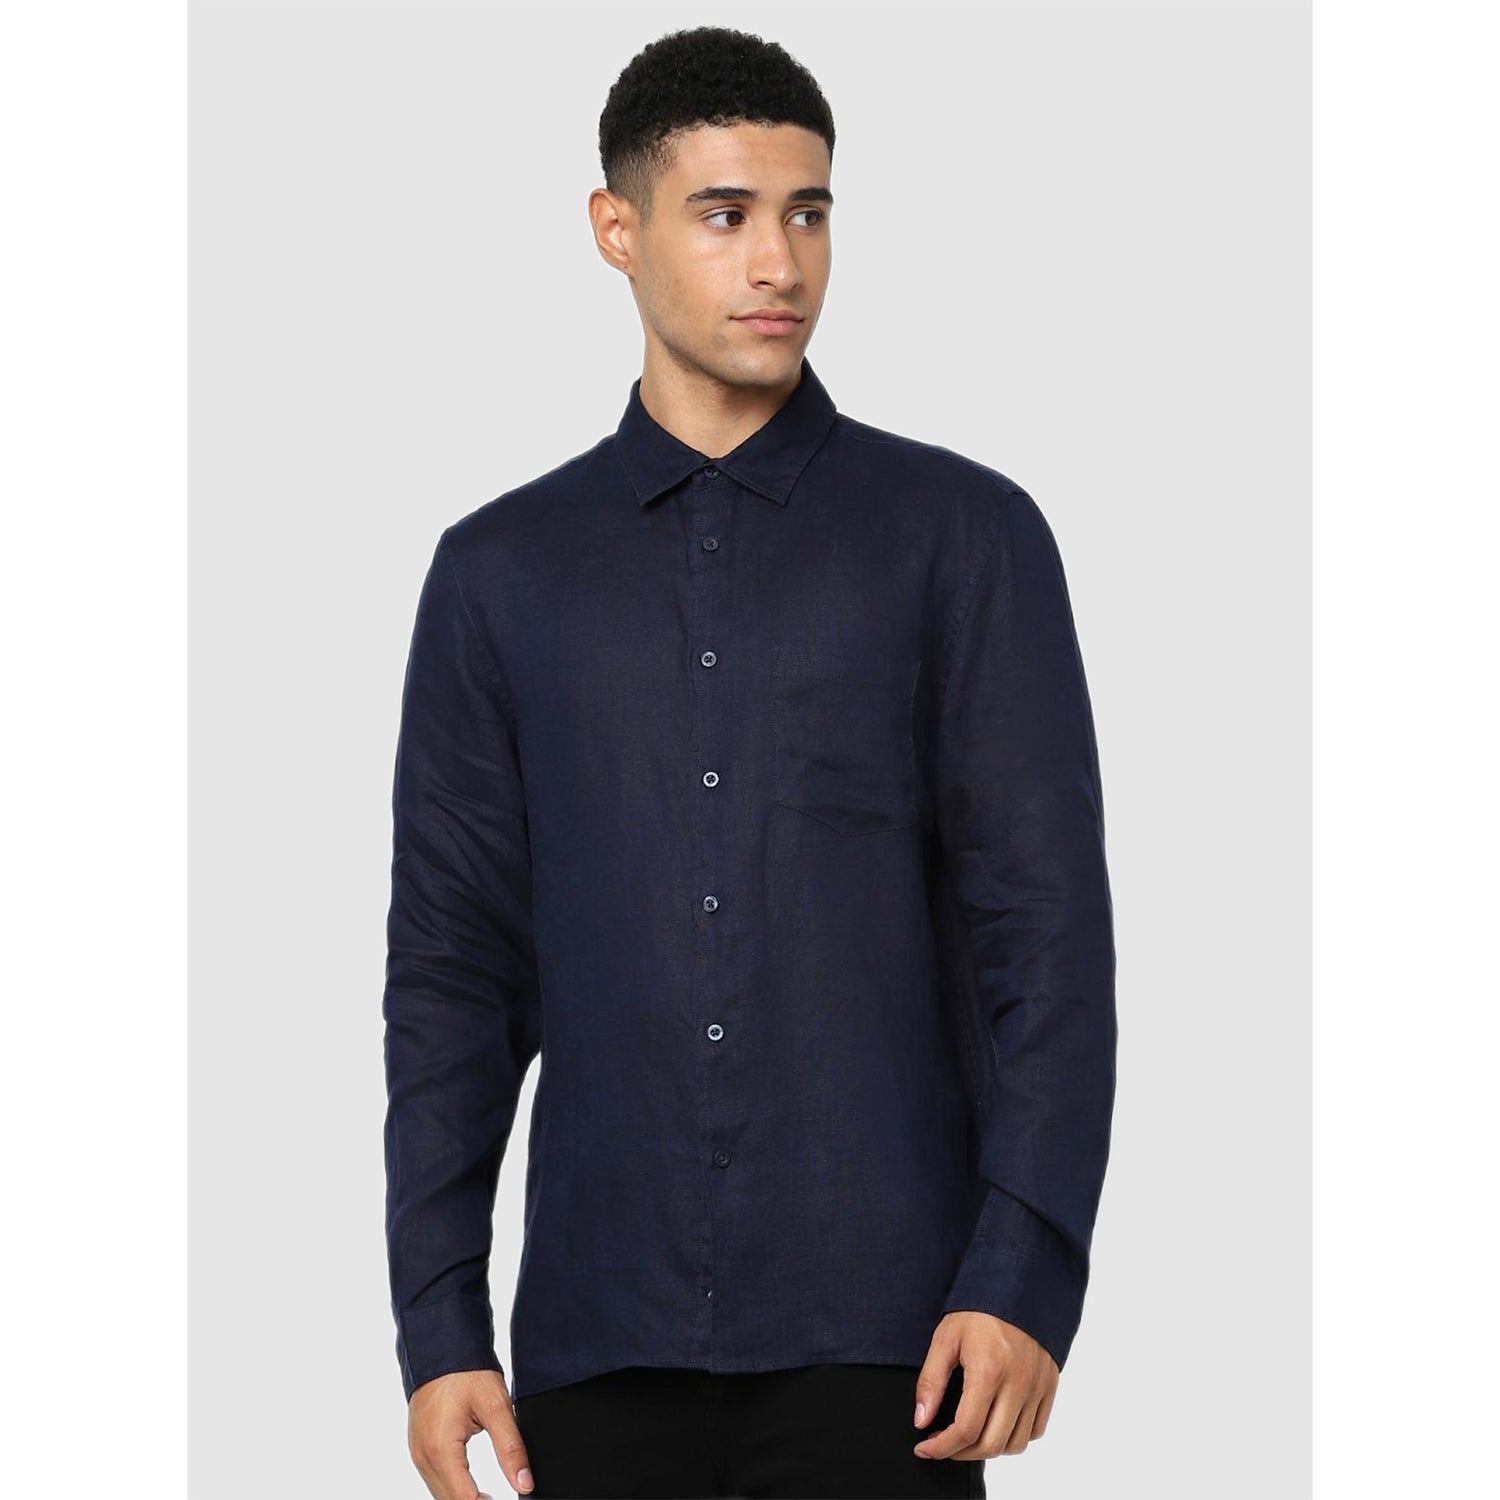 Navy Blue Solid Regular Fit Classic Casual Shirt (BAFLAX)